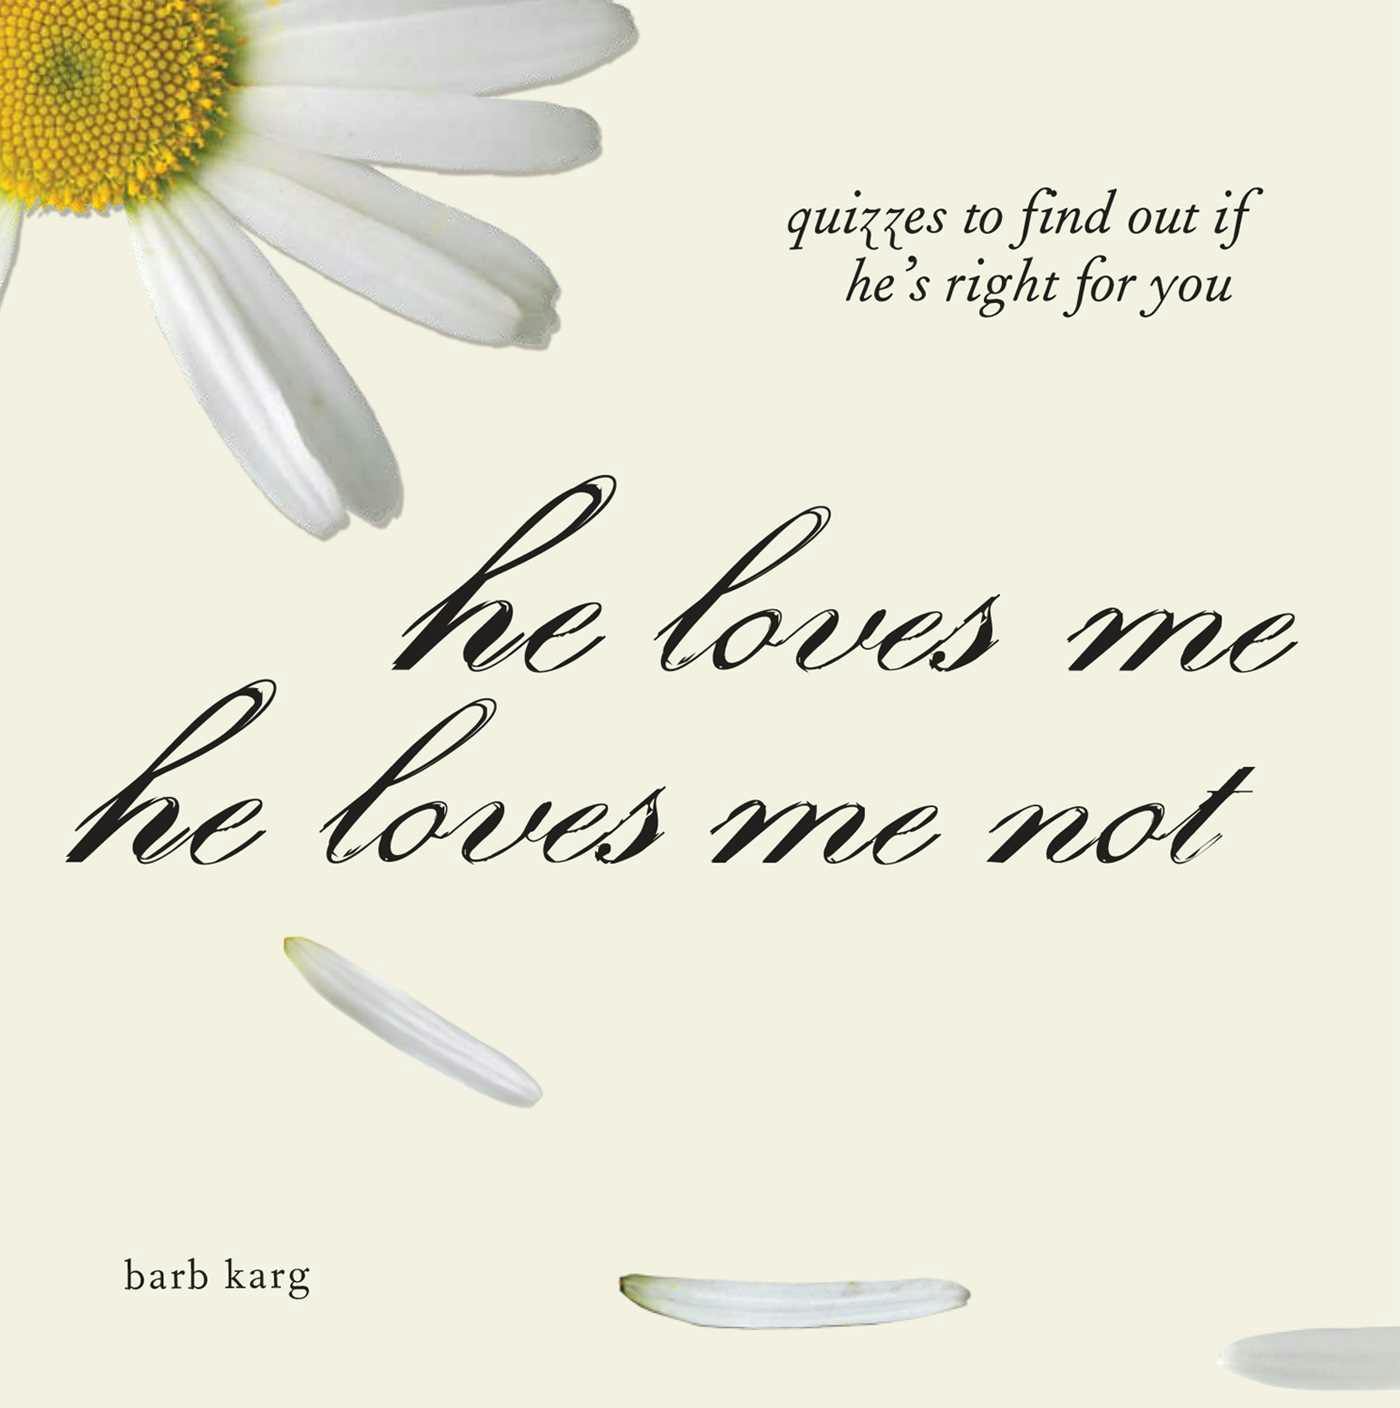 He Loves Me, He Loves Me Not: Quizzes to Find out if He's Right for you - Barb Karg